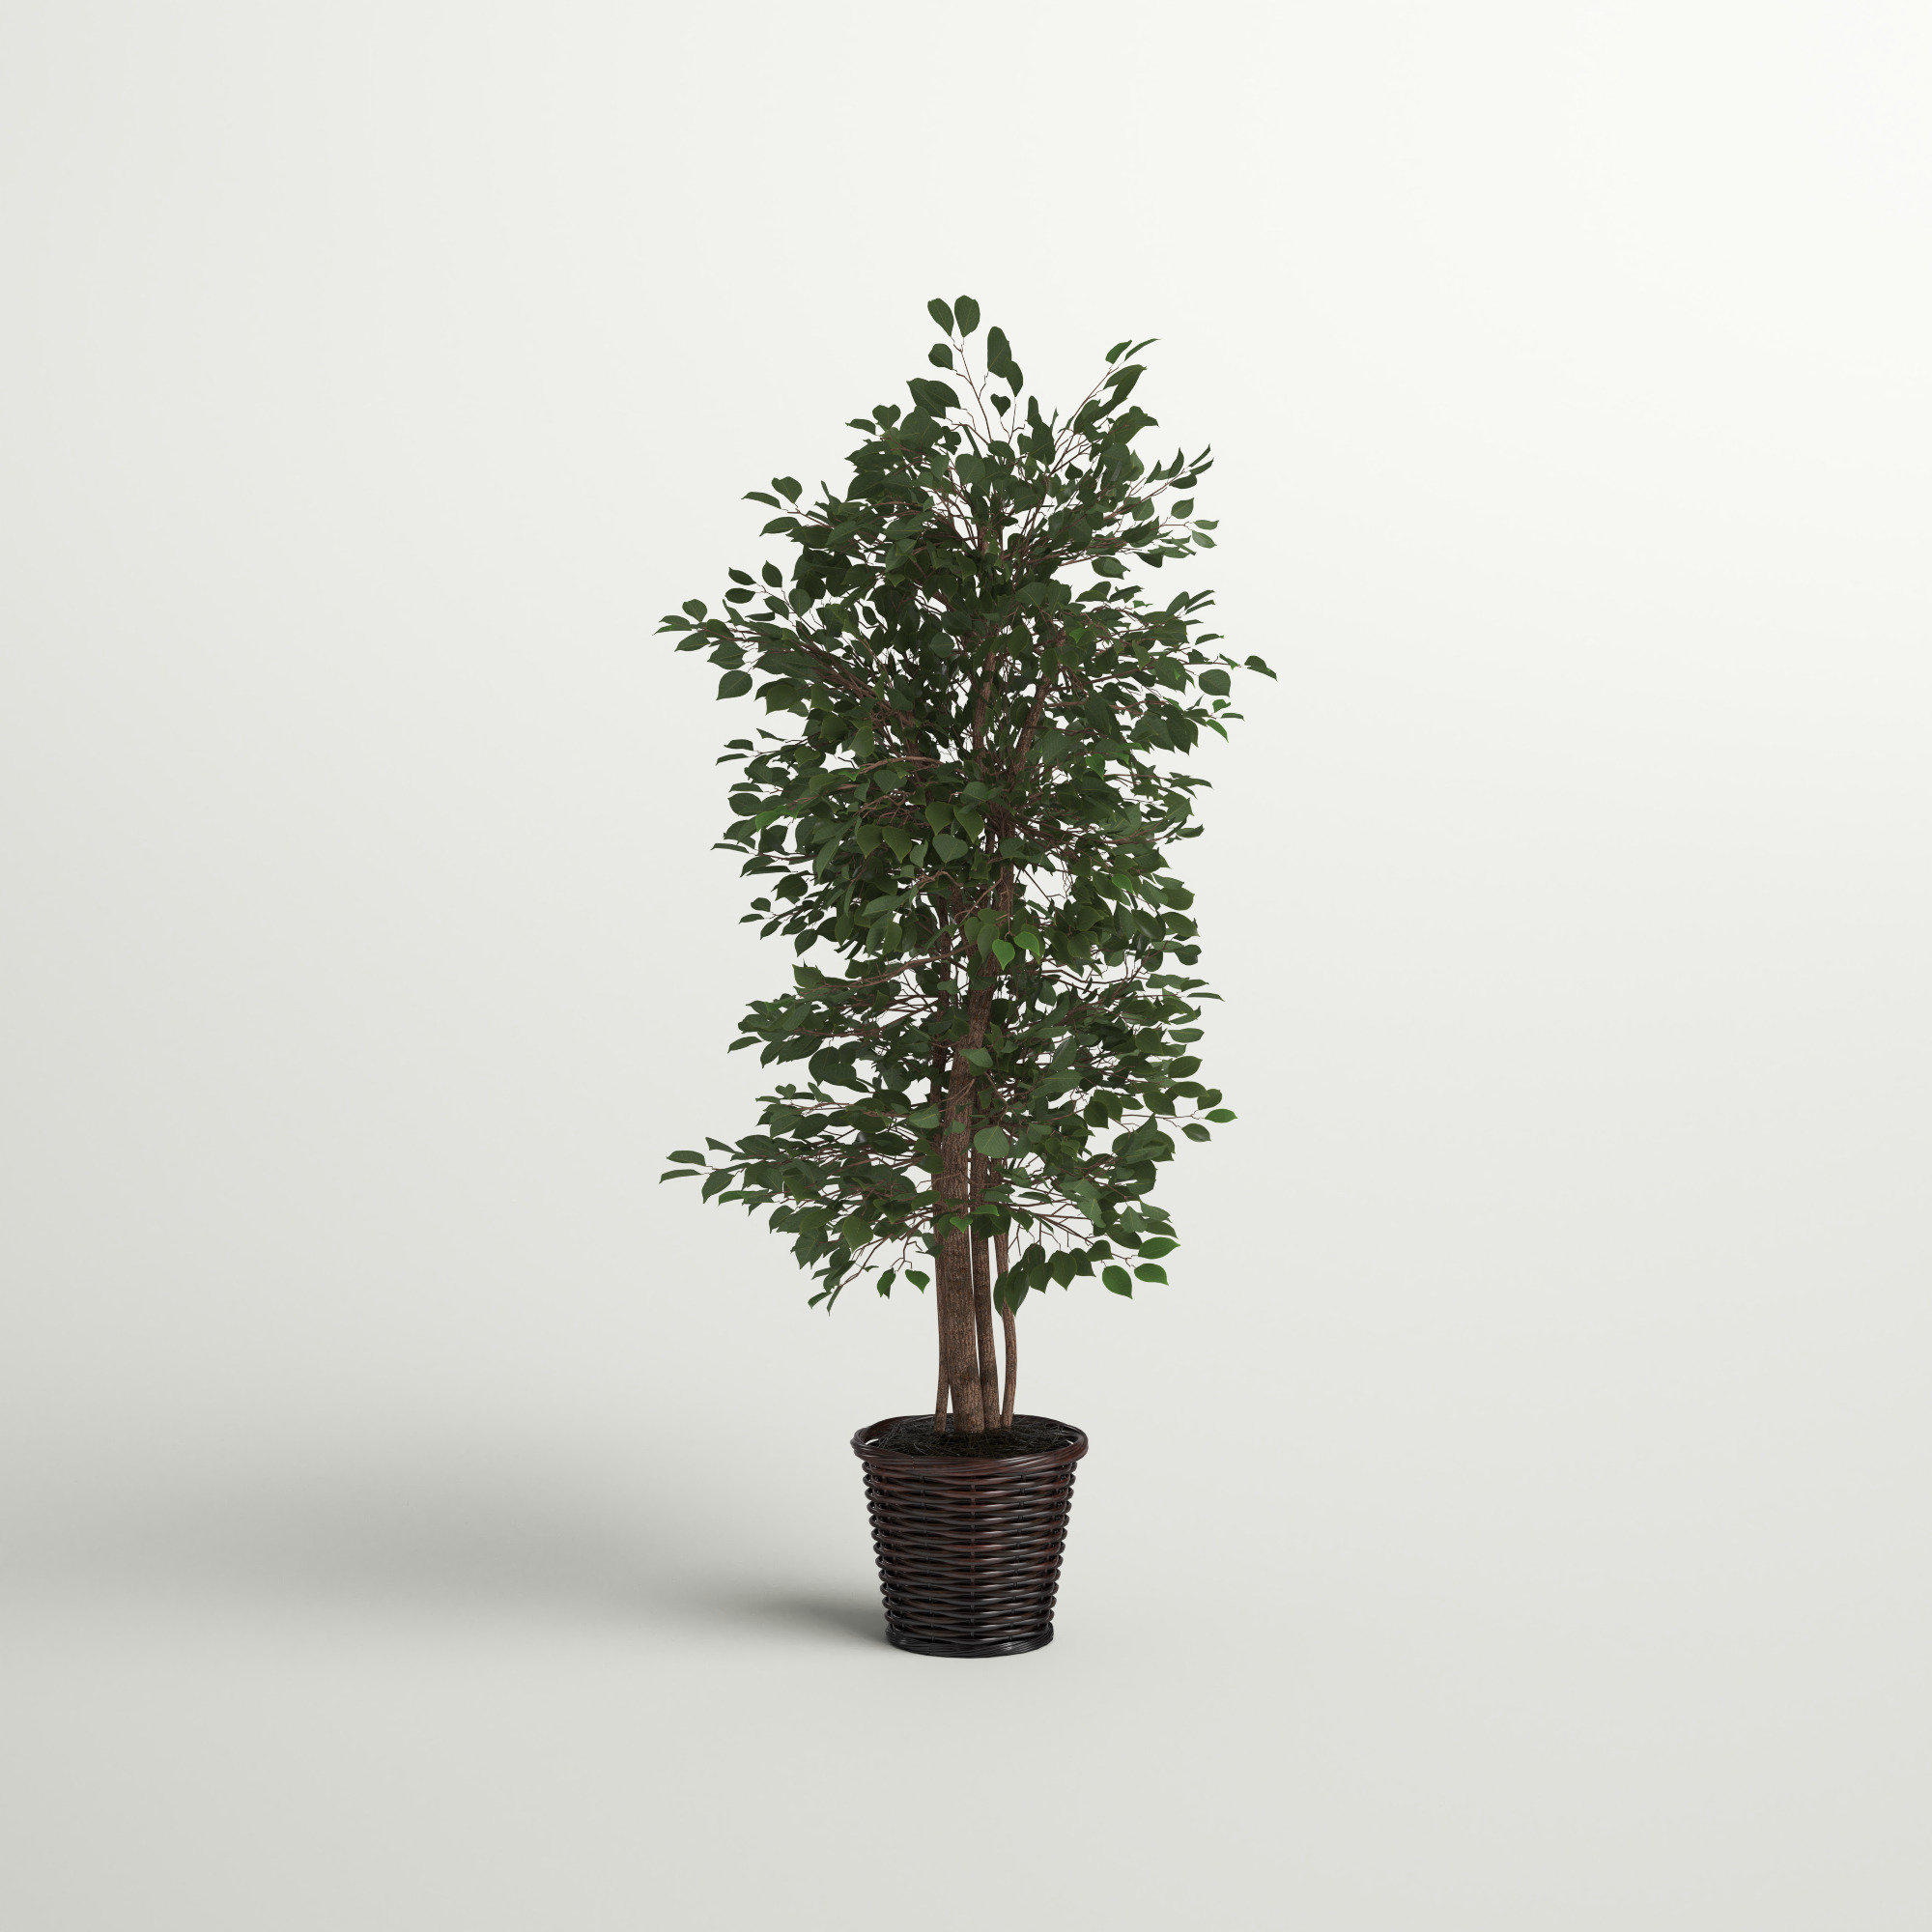 5 ft Realistic Artificial Ficus Tree in Pot, Natural Trunk, Lush Leaves,  Lifelike Faux Tree